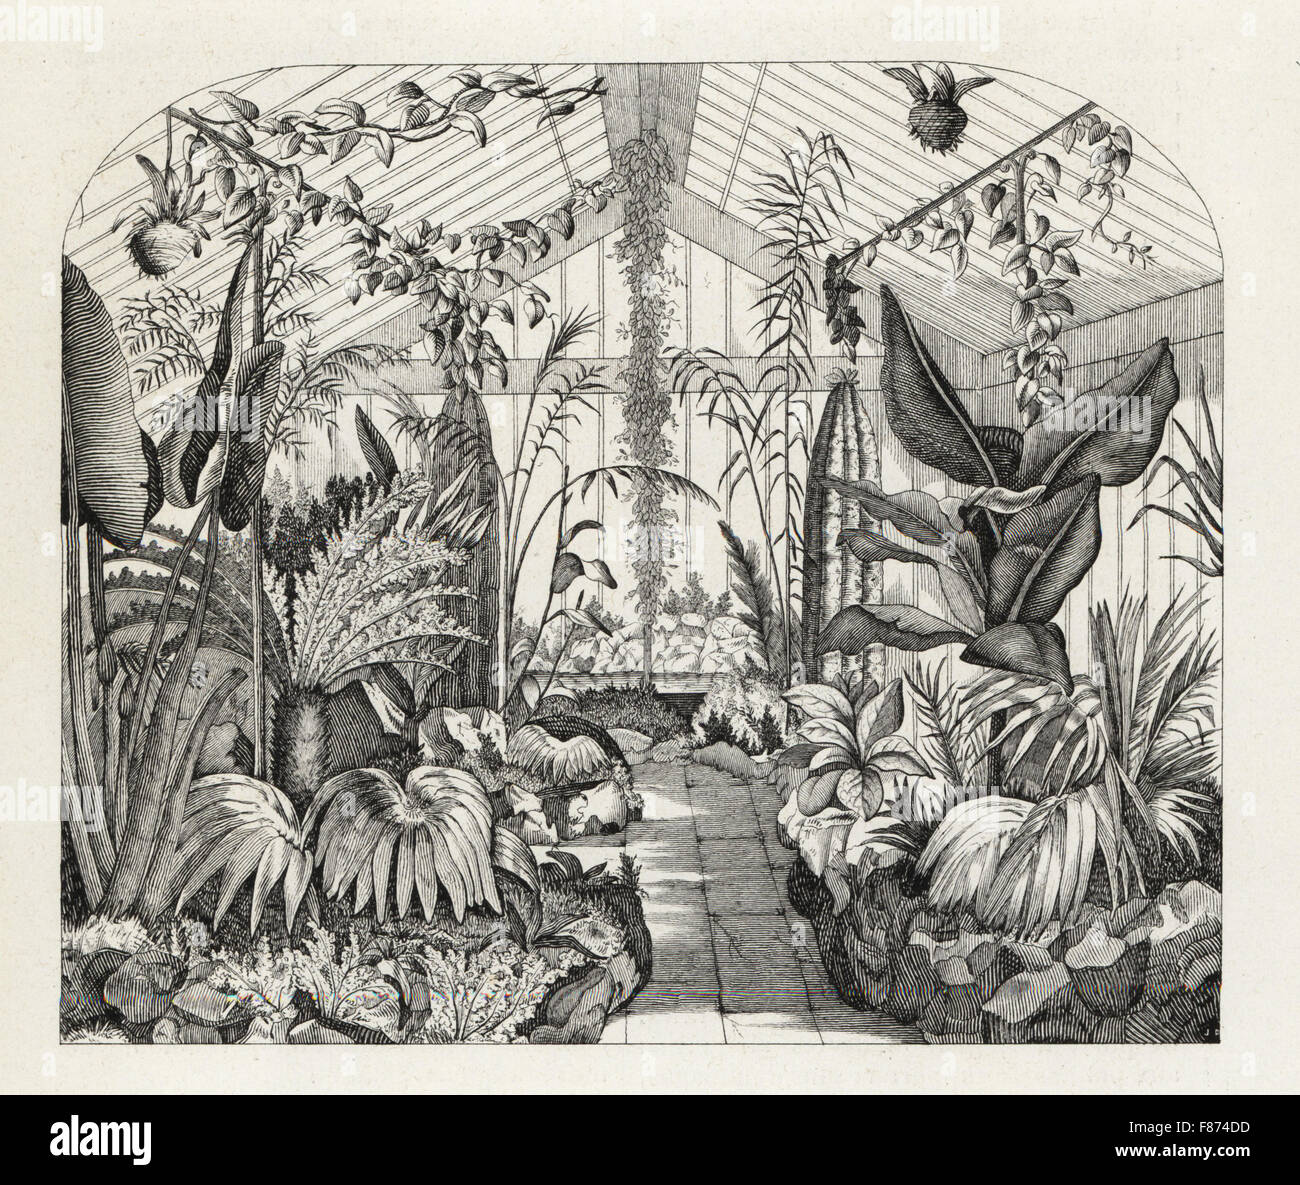 Interior of Nathaniel Ward's fern greenhouse, Clapham, London, 1851. Inventor of the Wardian Case. Woodblock engraving from Louis van Houtte and Charles Lemaire's Flowers of the Gardens and Hothouses of Europe, Flore des Serres et des Jardins de l'Europe, Ghent, Belgium, 1851. Stock Photo